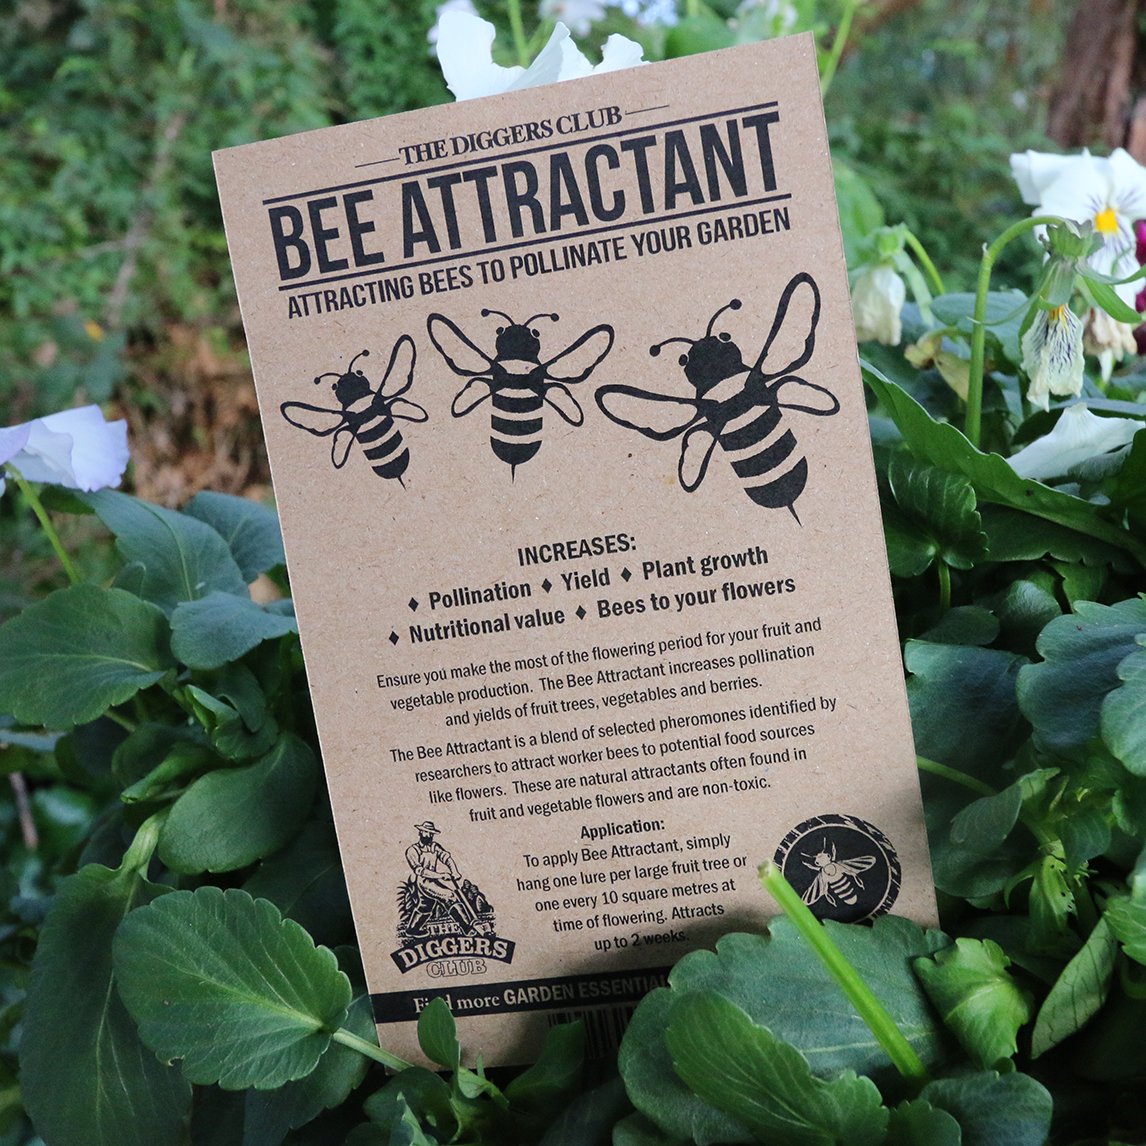 Bee Attractant - The Diggers Club